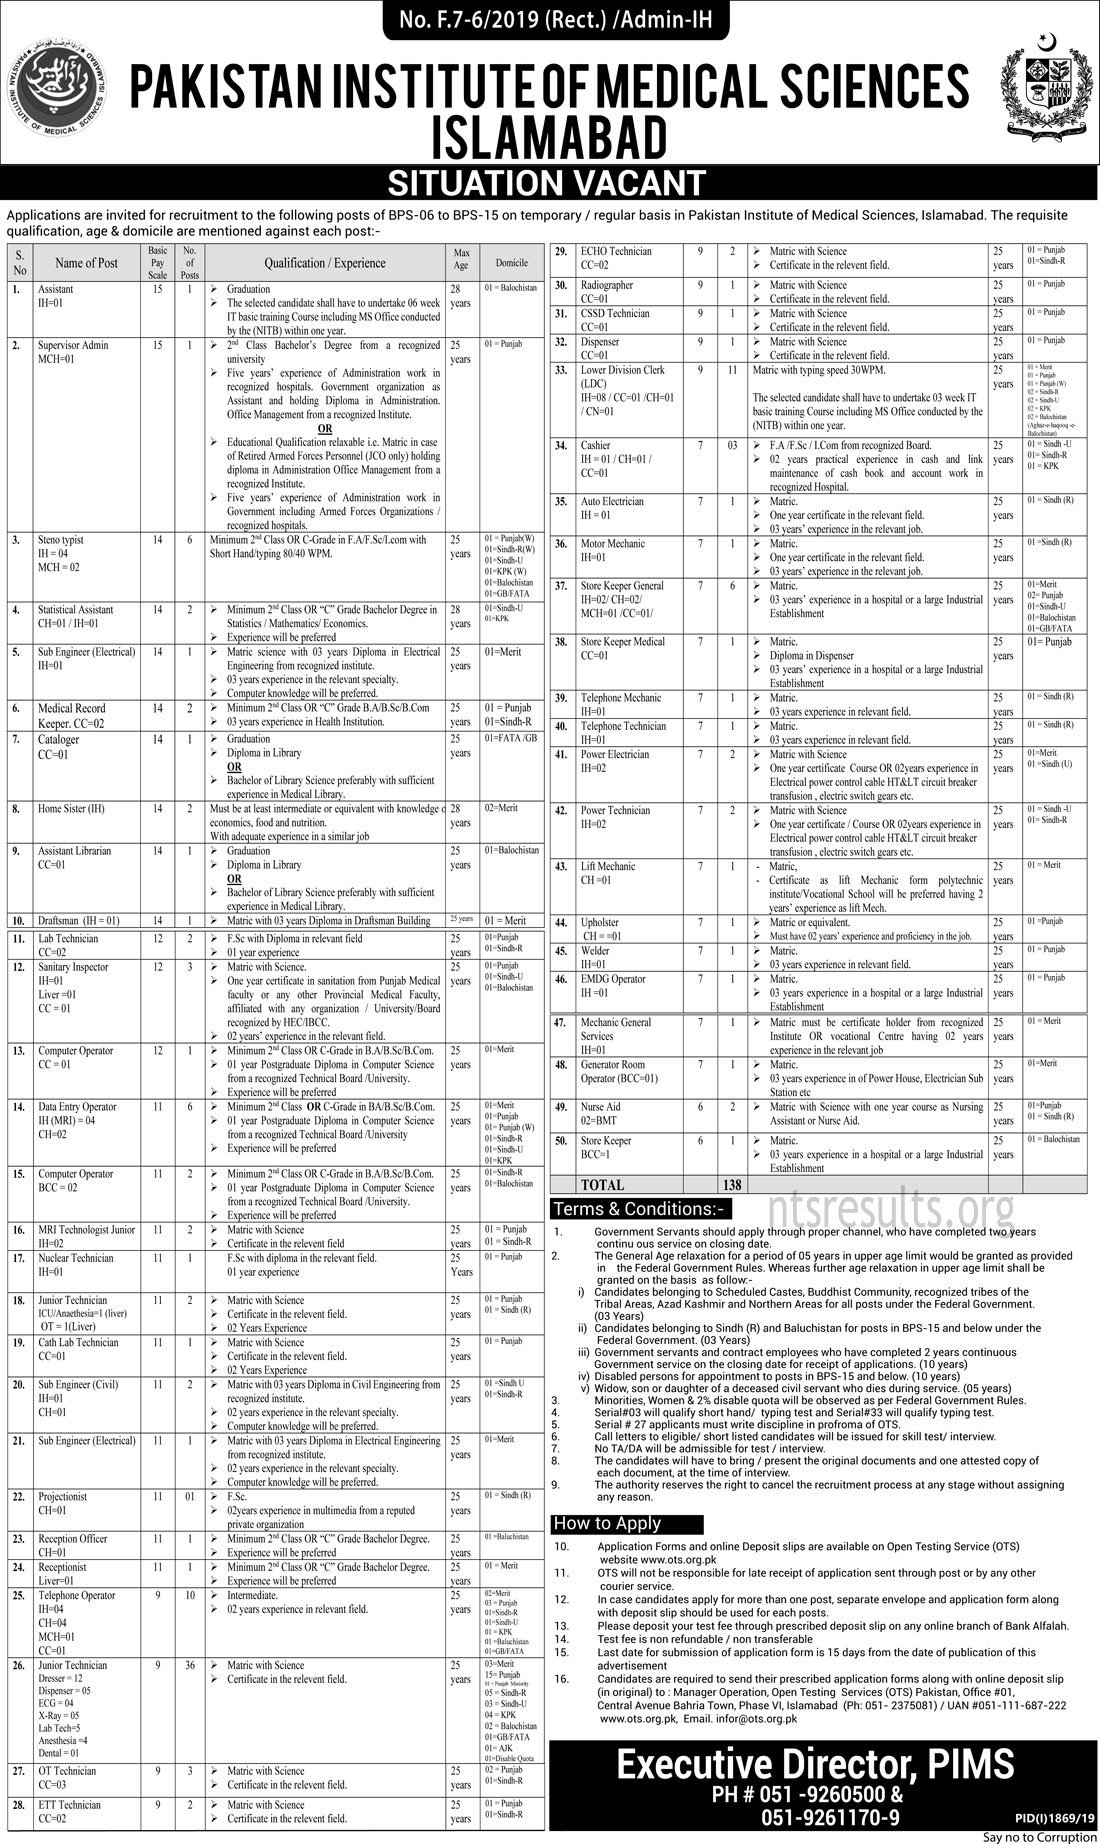 Pakistan Institute of Medical Sciences Islamabad PIMS Jobs OTS Test Roll No Slip